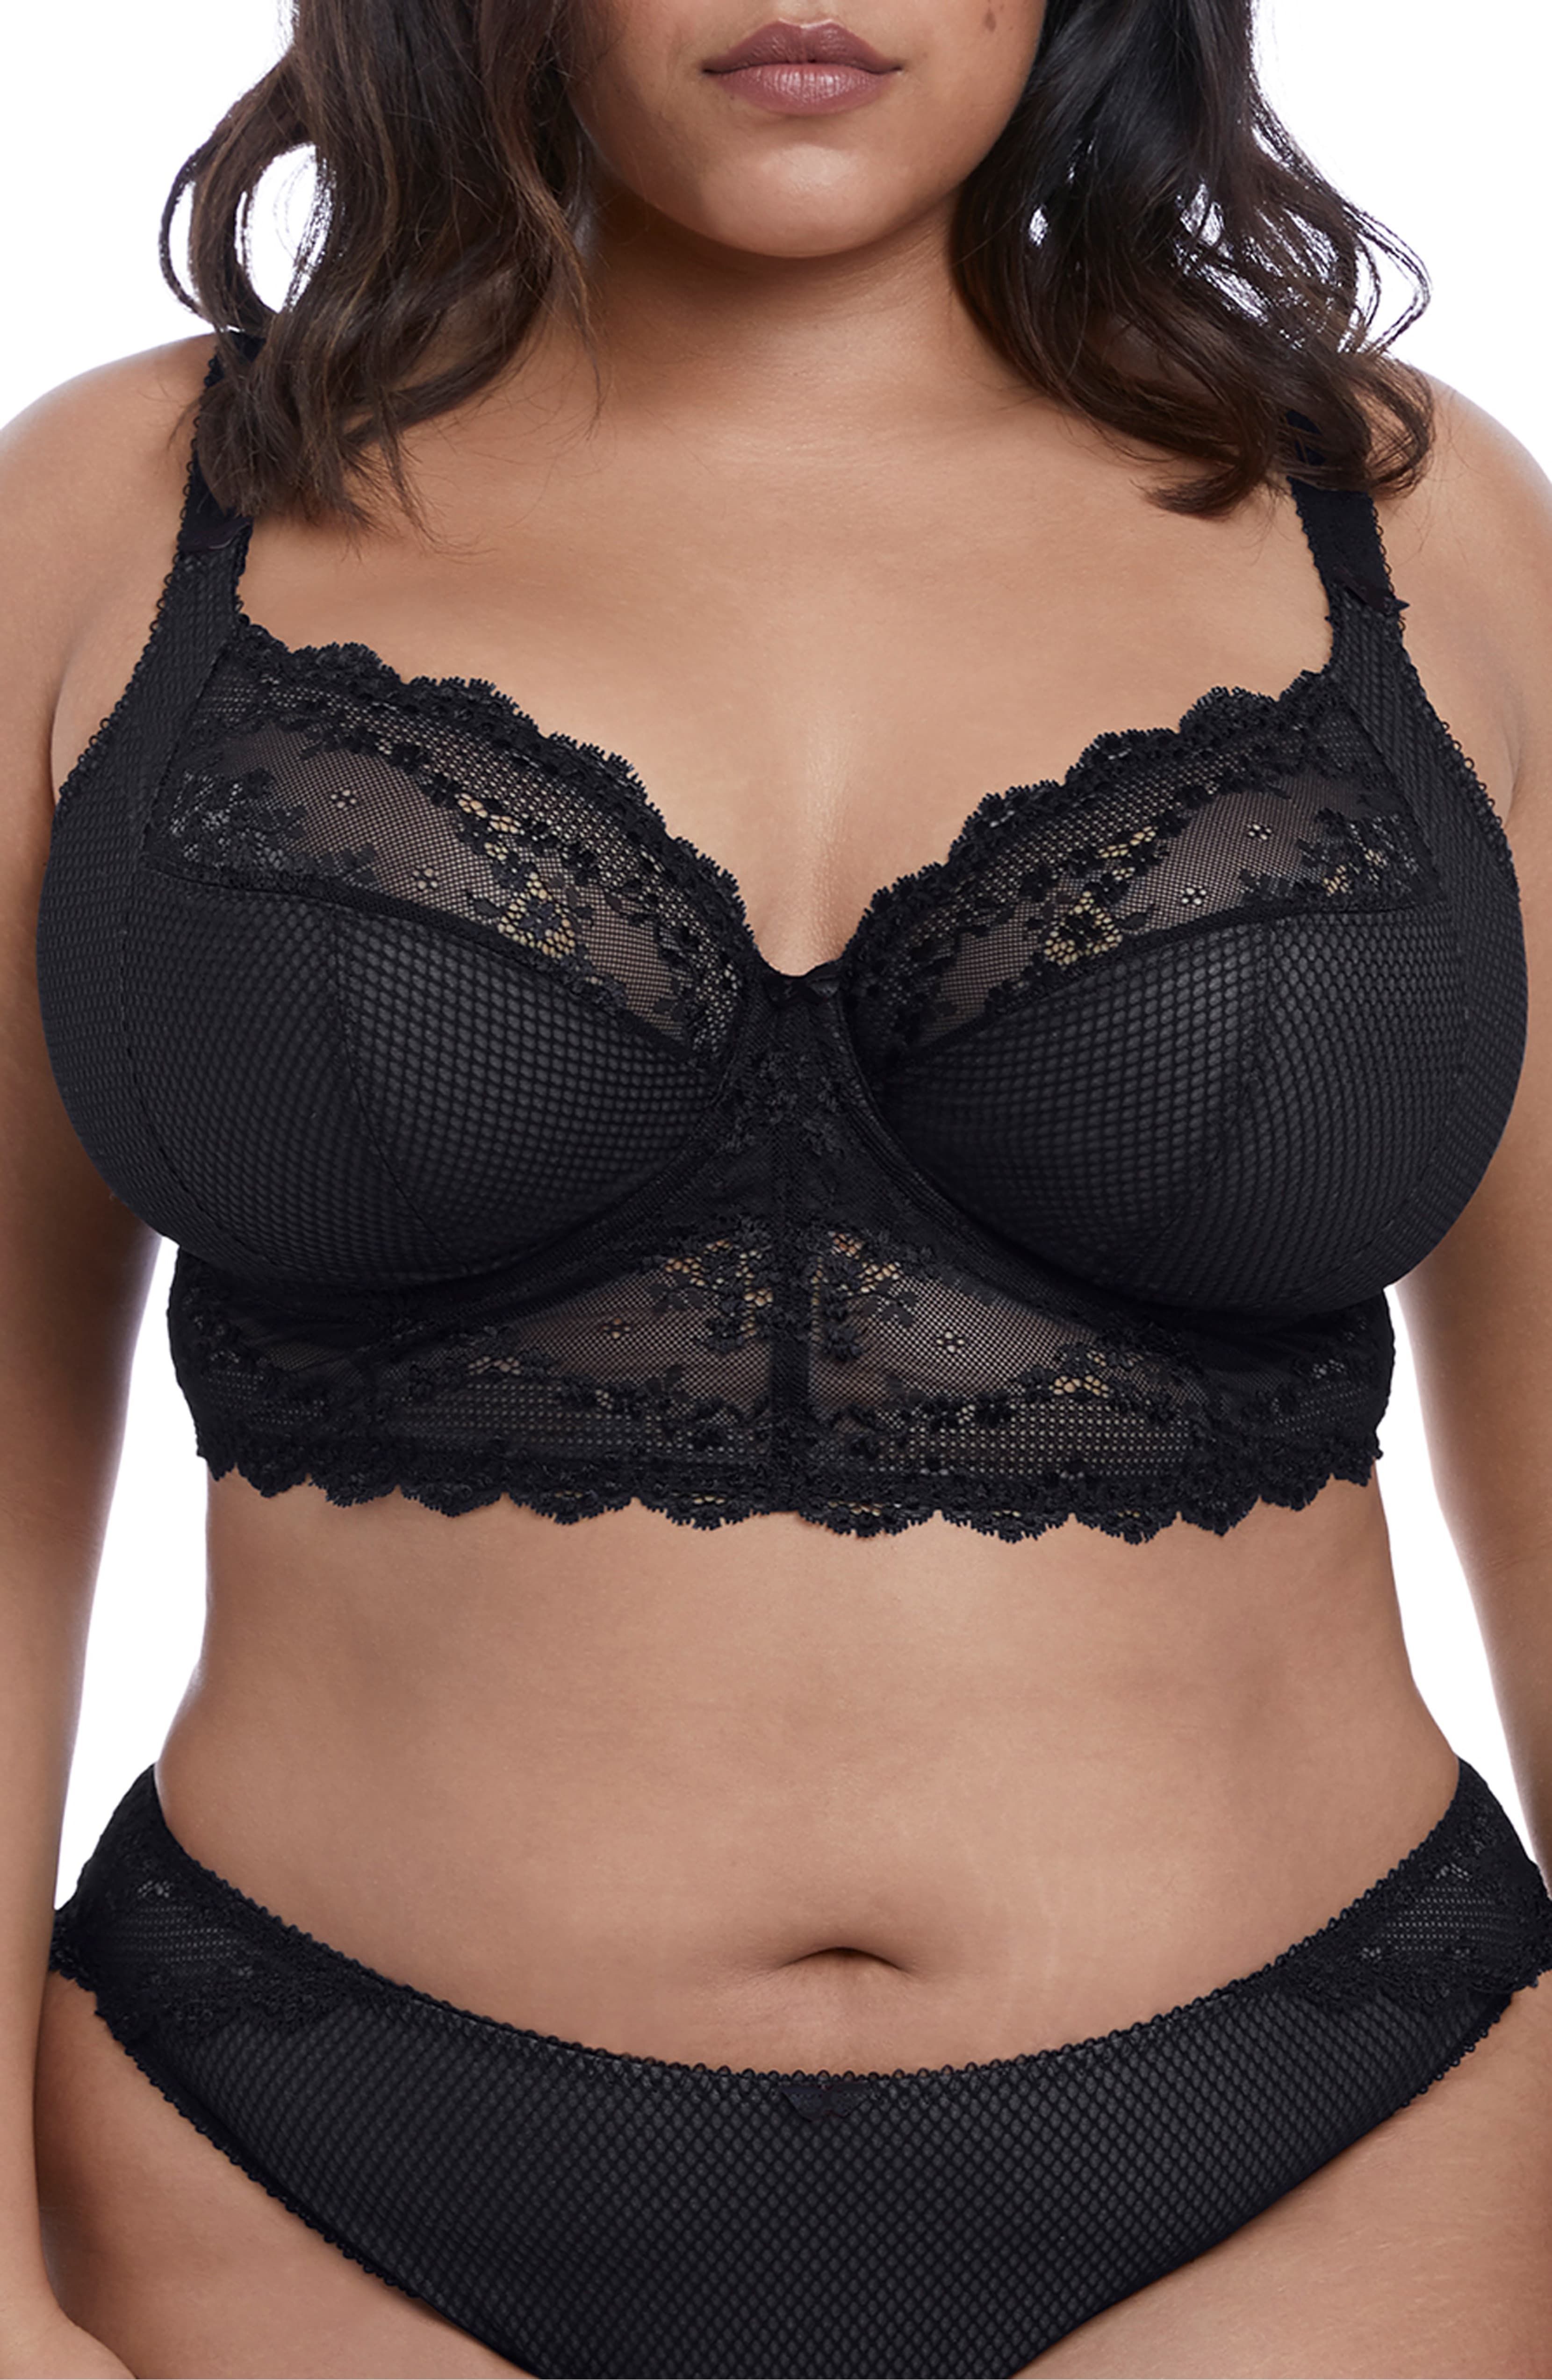 Bra stores for large breasts small waist Best Bras For Big Boobs 2021 Lingerie Brands For Large Breasts